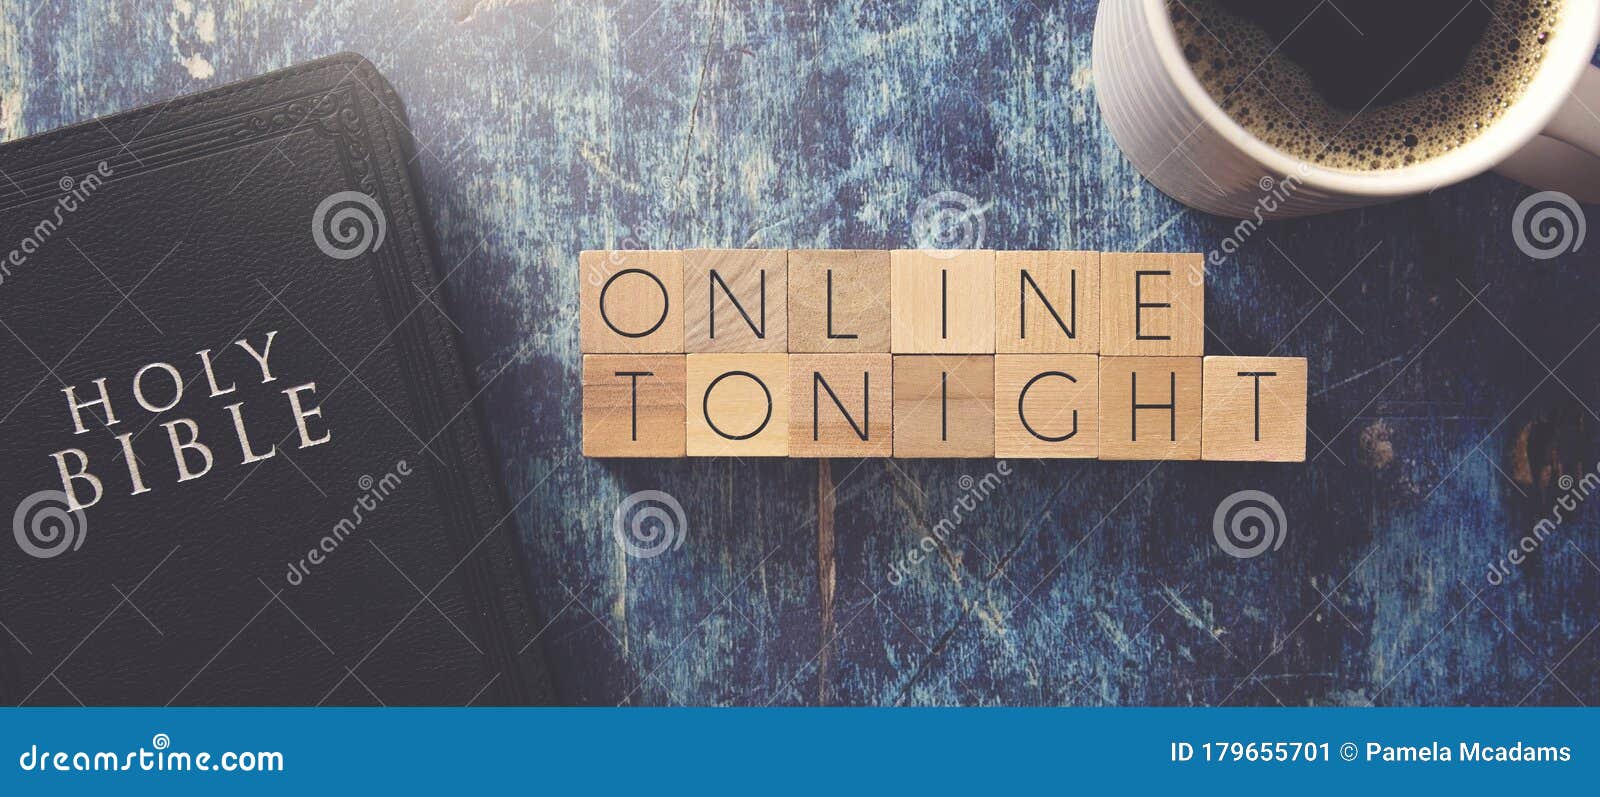 online tonight written in block letters on a blue wood table with a bible